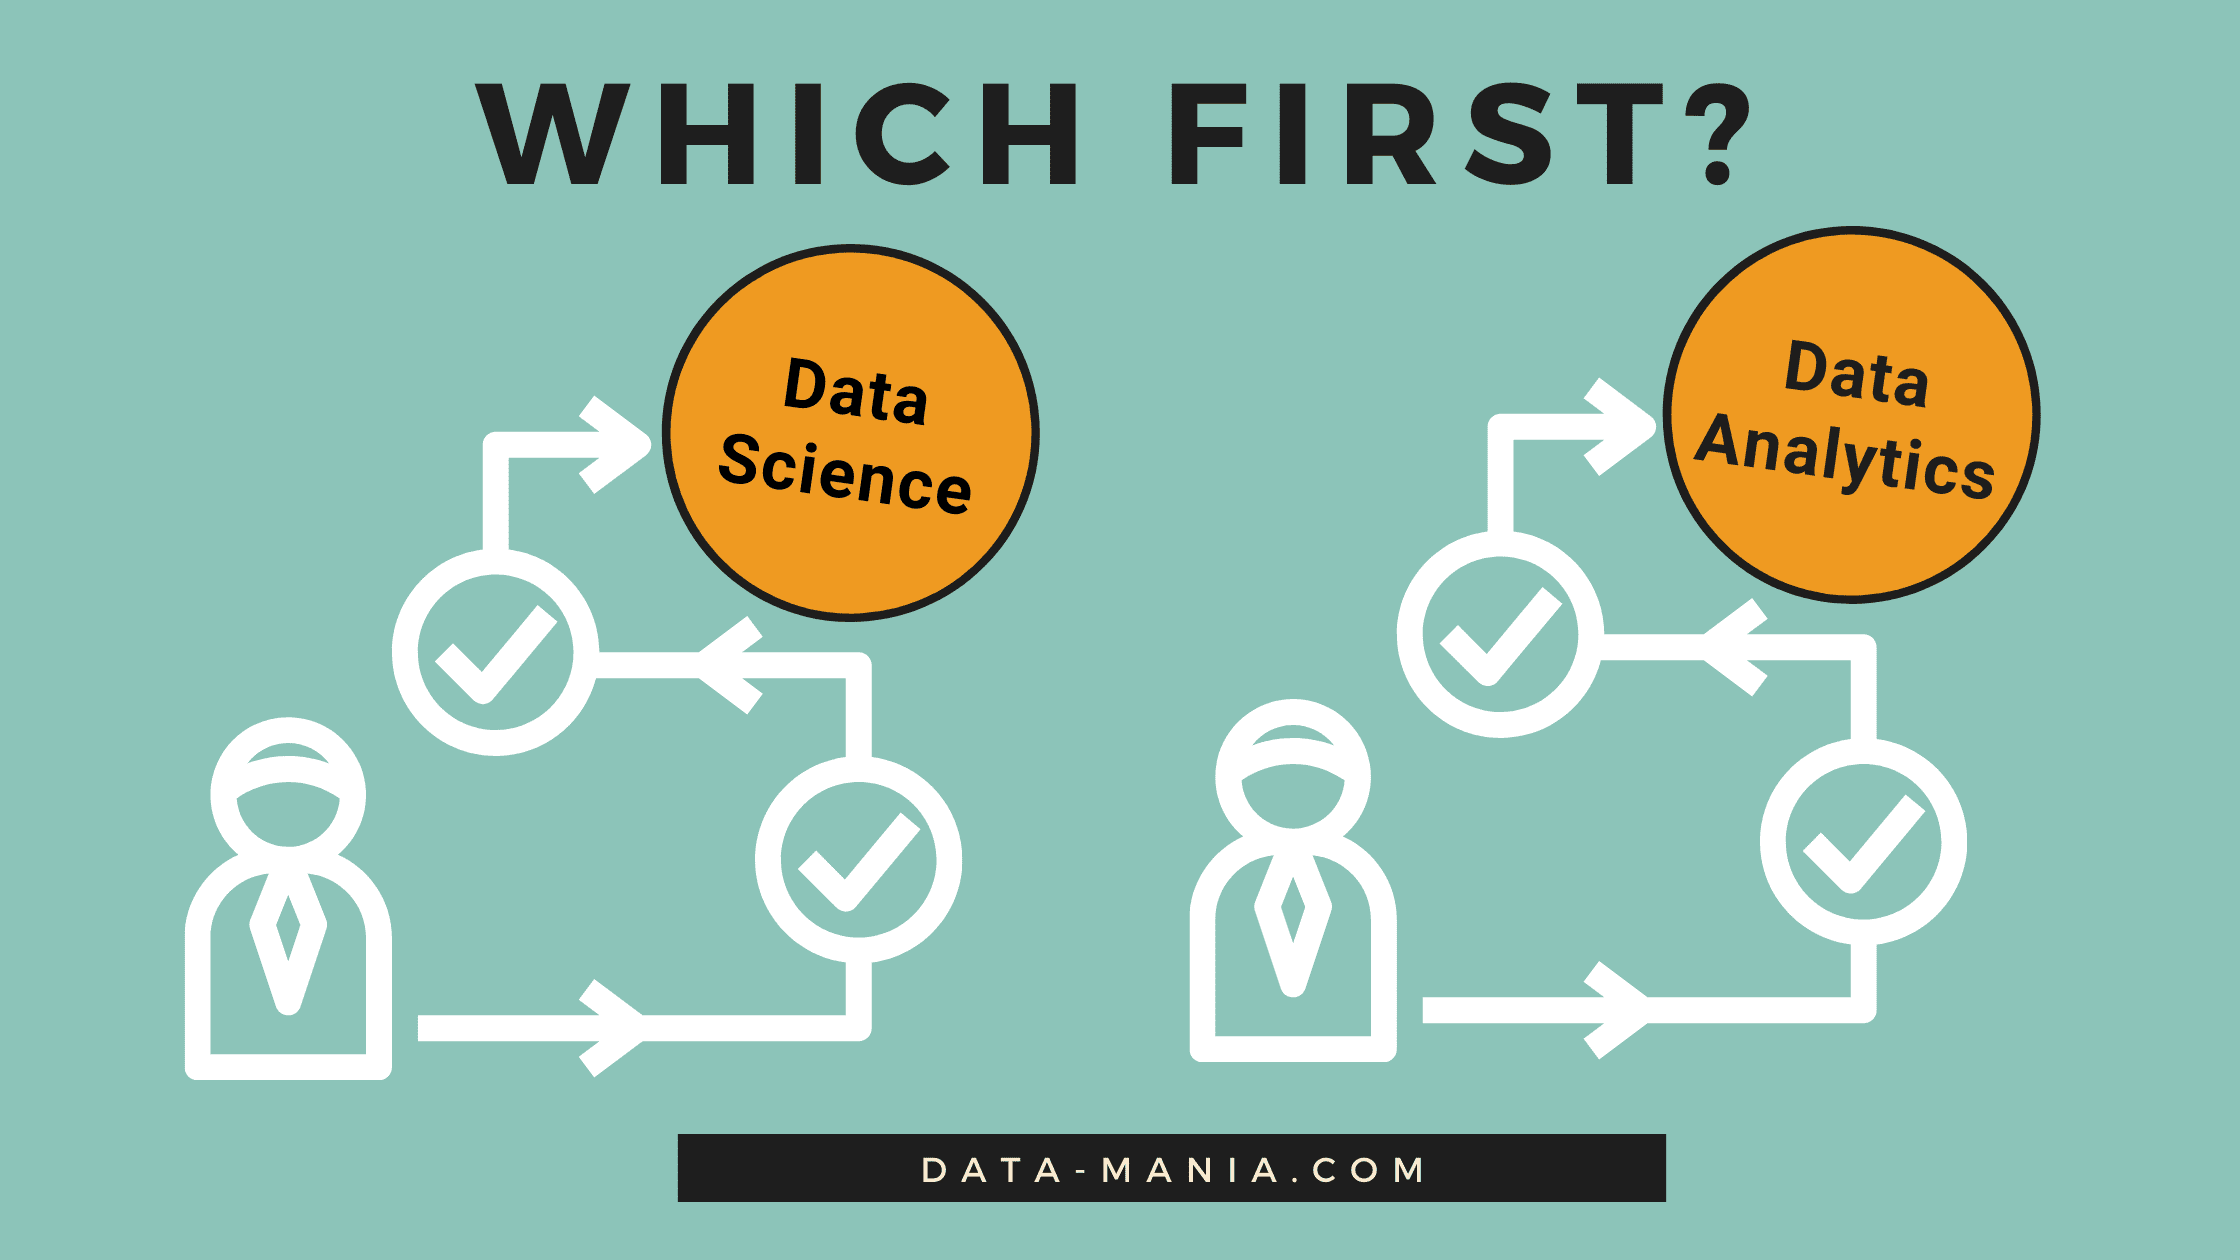 Data Science vs. Data Analytics: Which To Learn First?